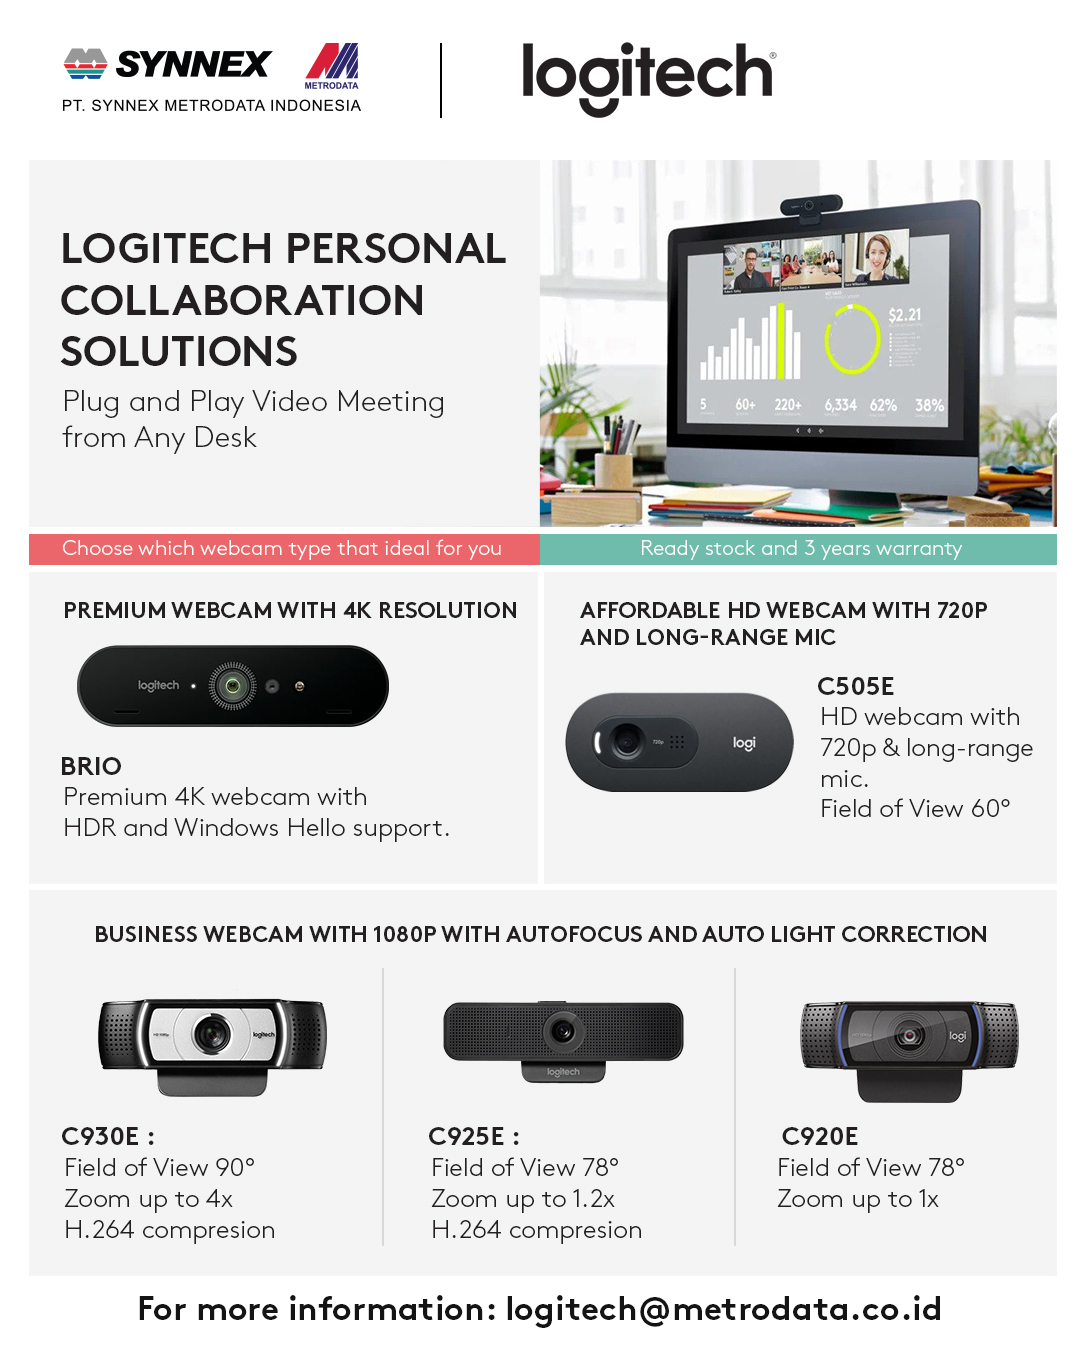 Logitech Personal Collaboration Solutions